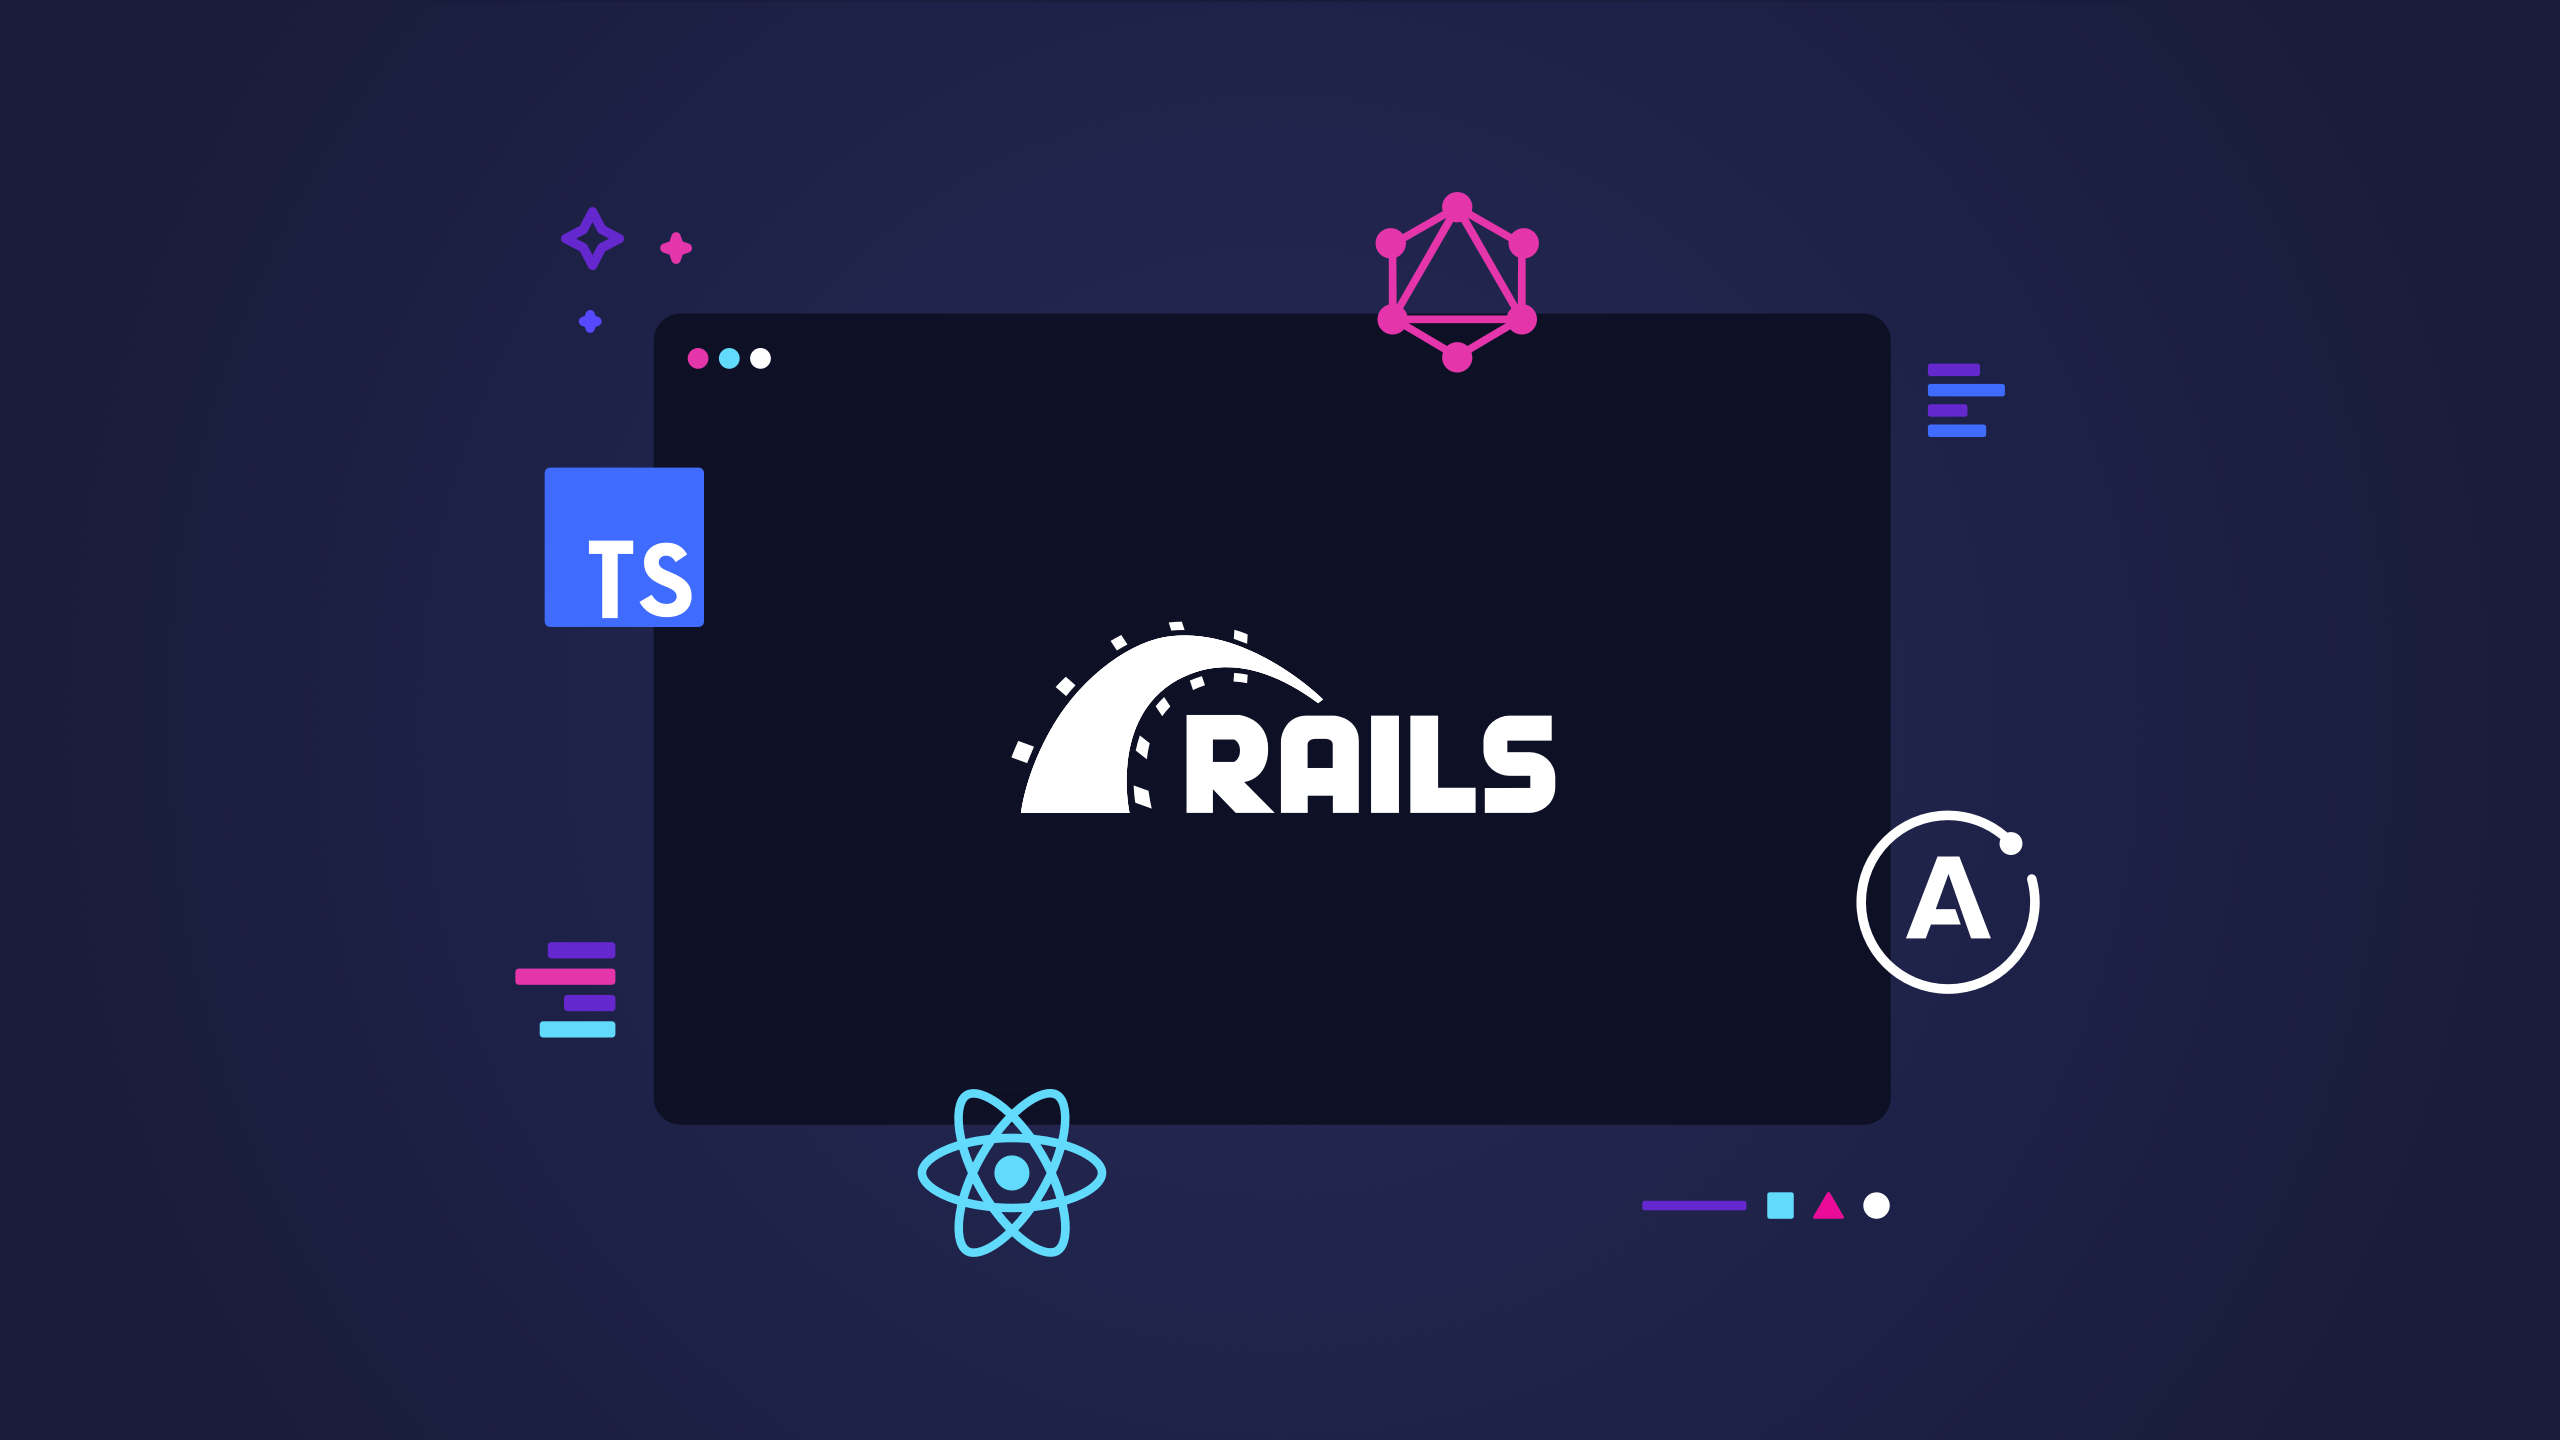 abstract illustration of user interface built using Rails, GraphQL, TypeScript, React, and Apollo